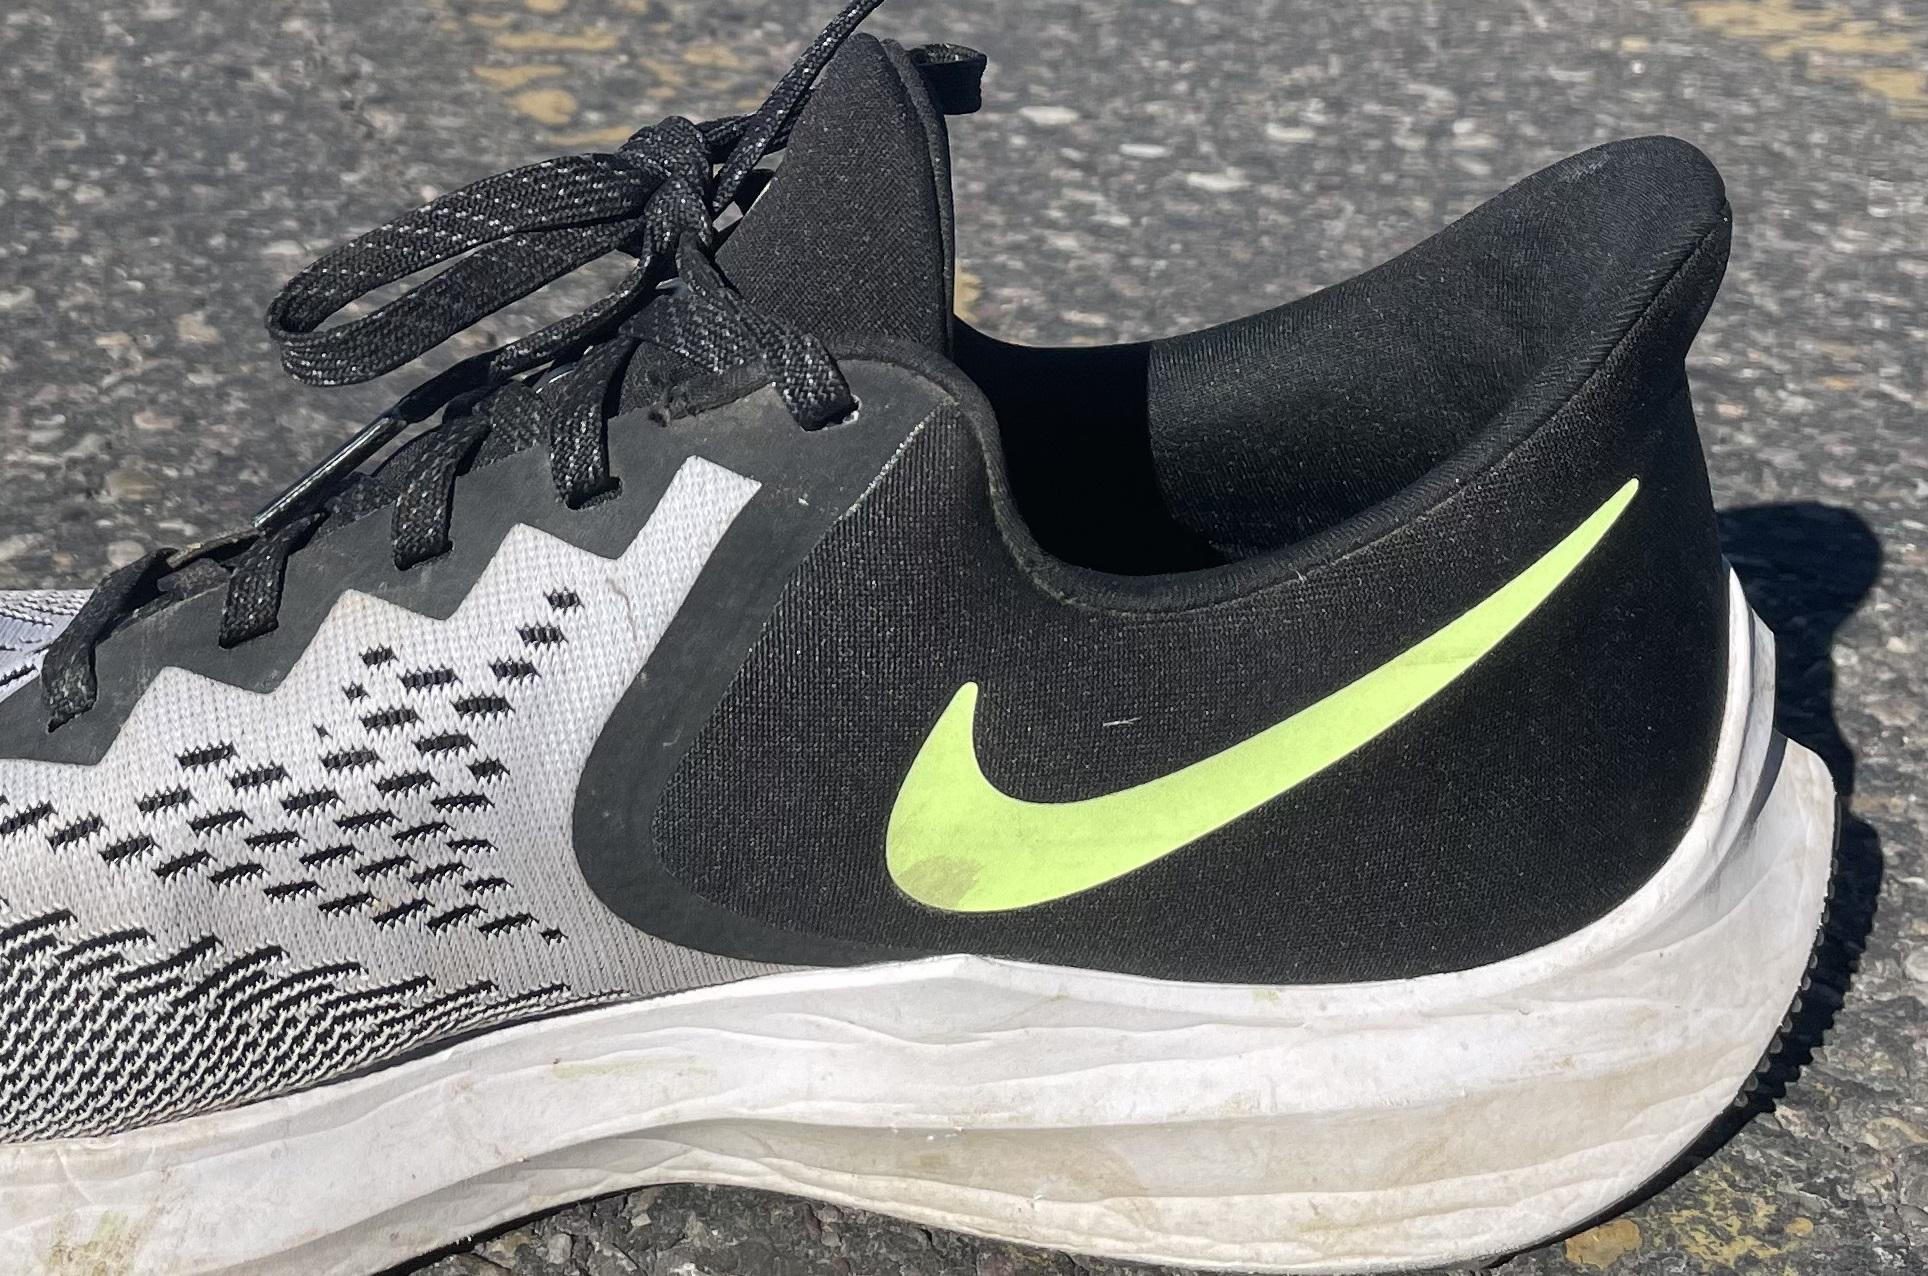 Nike Winflo 6 Review, Facts, Comparison RunRepeat